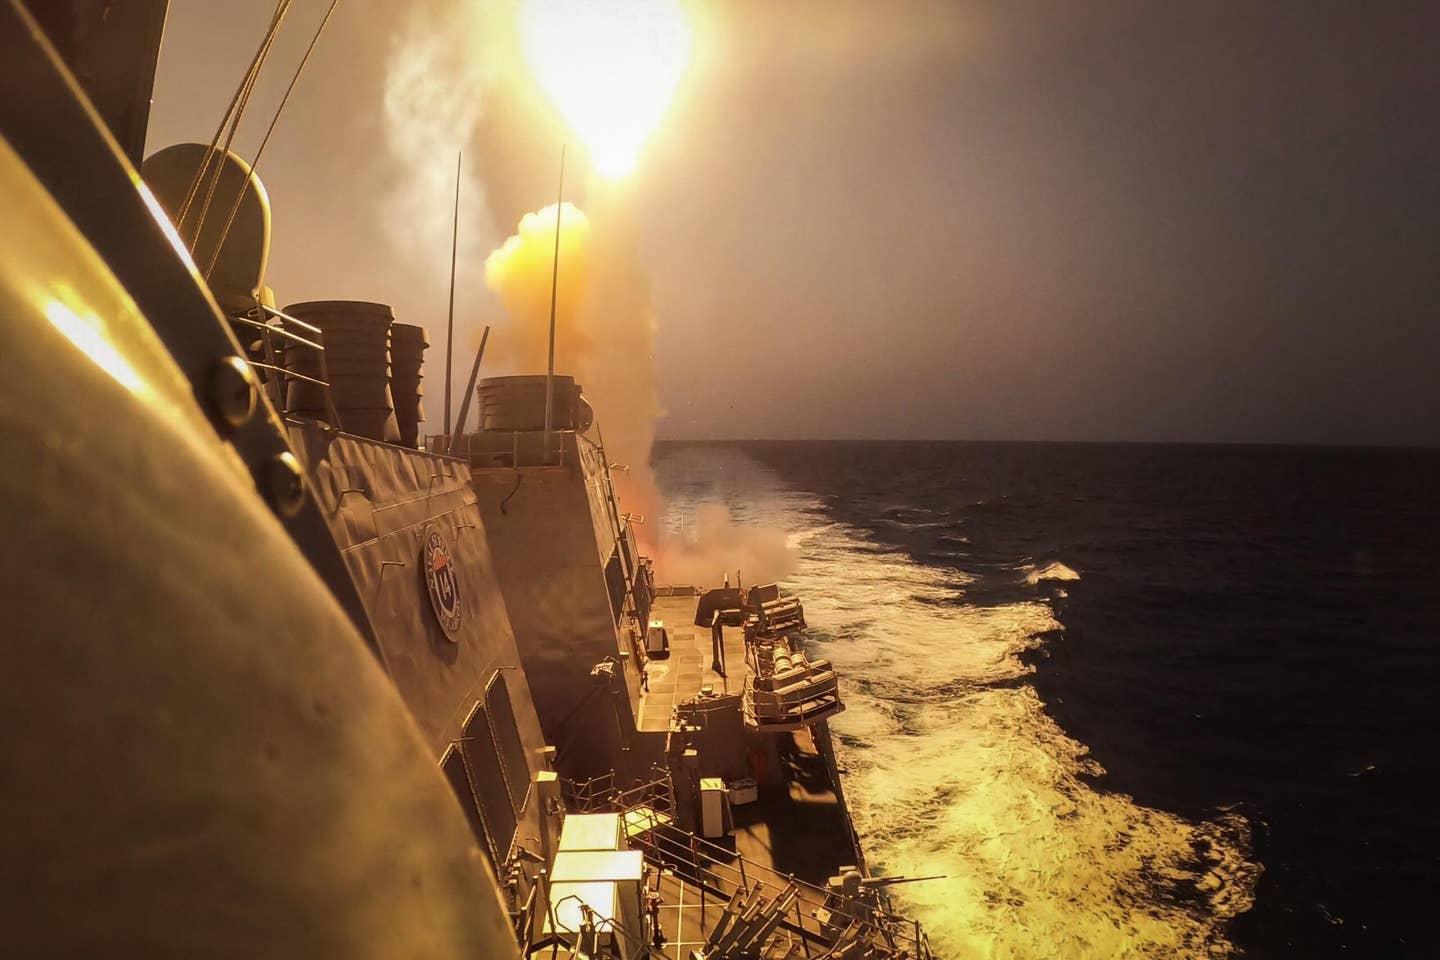 The Arleigh Burke-class guided-missile destroyer USS Carney (DDG 64) fires a Standard Missile (SM) 2 to defeat a combination of Houthi missiles and unmanned aerial vehicles in the Red Sea, Oct. 19, 2023. (U.S. Navy photo by Mass Communication Specialist 2nd Class Aaron Lau)